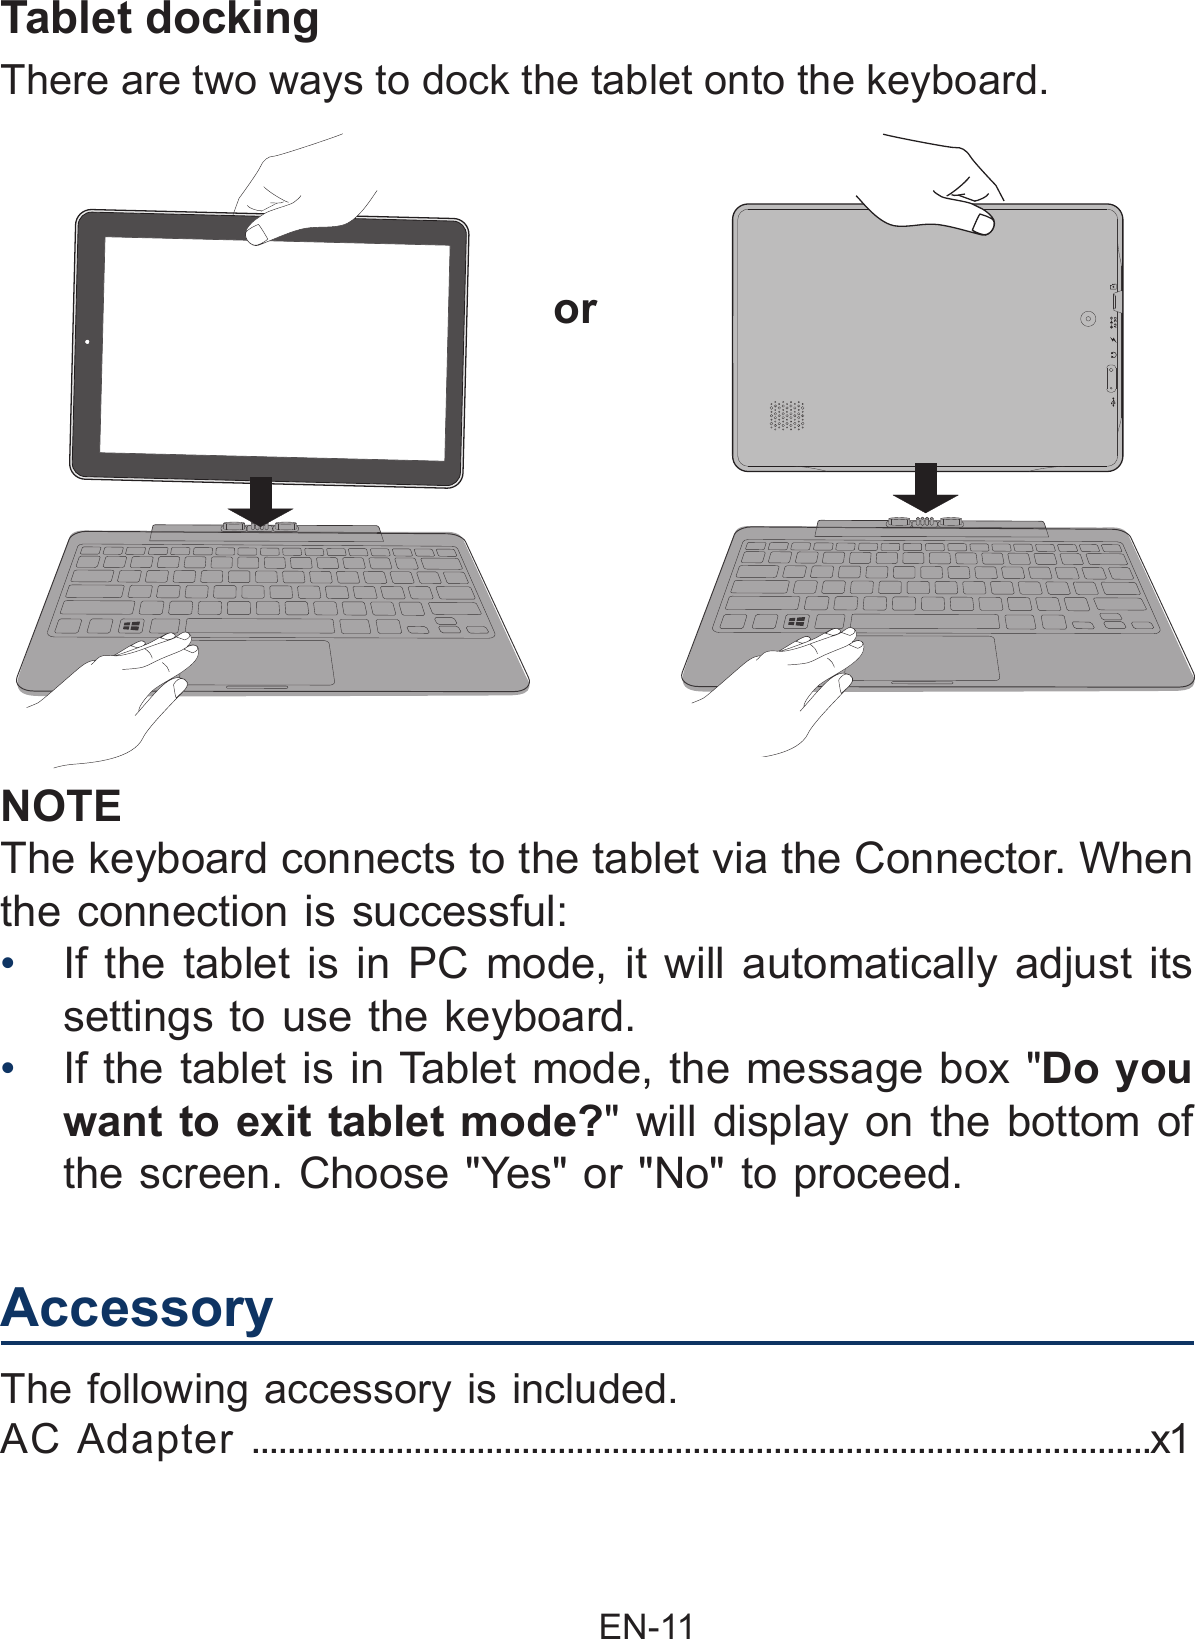                                                EN-11 NOTEThe keyboard connects to the tablet via the Connector. When the connection is successful: •  If the tablet is in PC mode, it will automatically adjust its settings to use the keyboard.•  If the tablet is in Tablet mode, the message box &quot;Do you want to exit tablet mode?&quot; will display on the bottom of the screen. Choose &quot;Yes&quot; or &quot;No&quot; to proceed.There are two ways to dock the tablet onto the keyboard.orTablet dockingAccessoryThe following accessory is included.AC Adapter ....................................................................................................x1